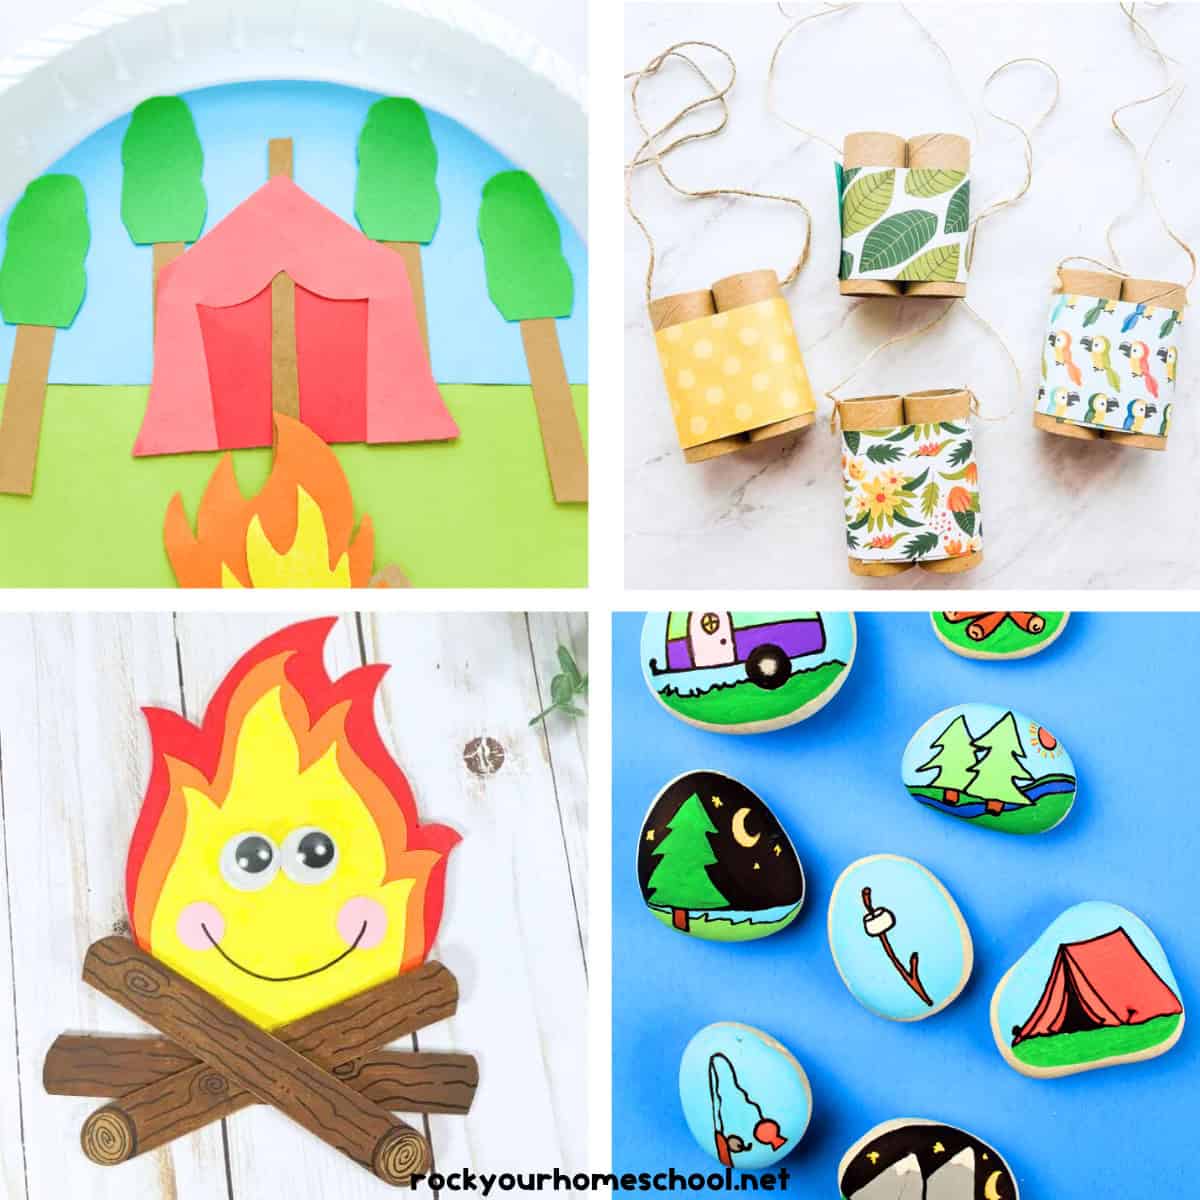 Four examples of camping crafts for kids.